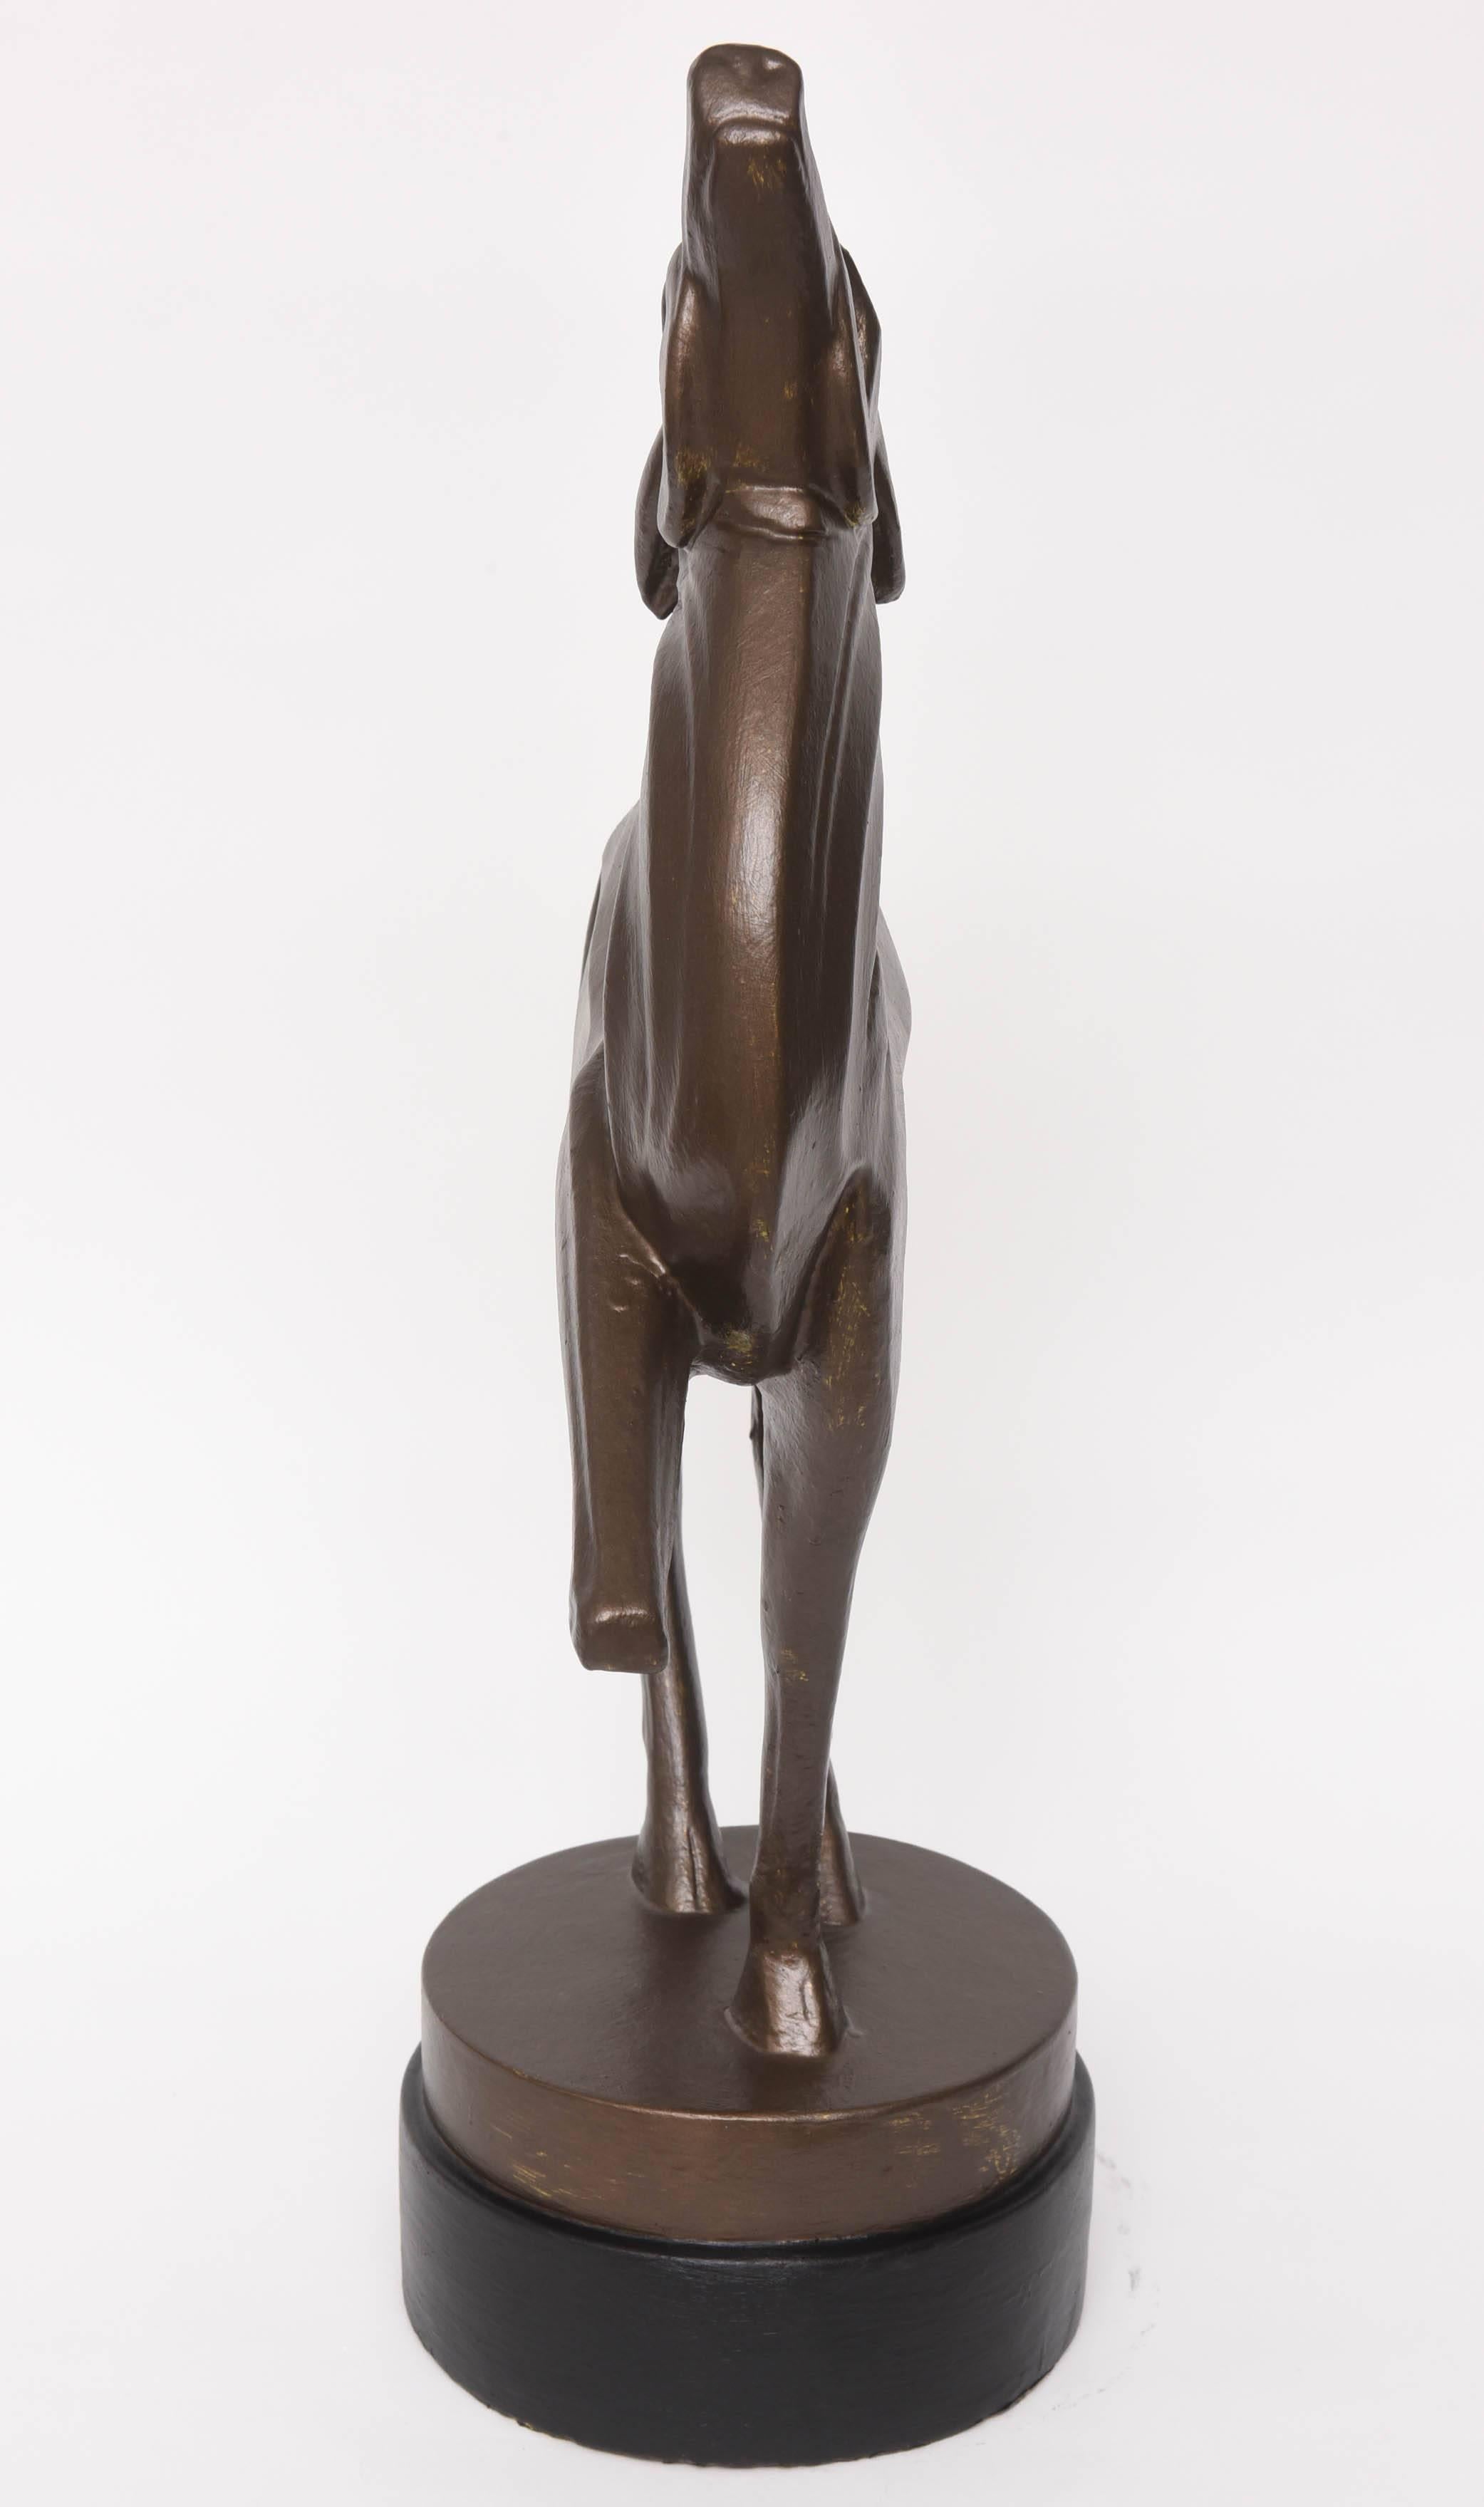 20th Century American Art Deco Patinated Faux-Bronze Sculpture of a Gazelle, 1930s